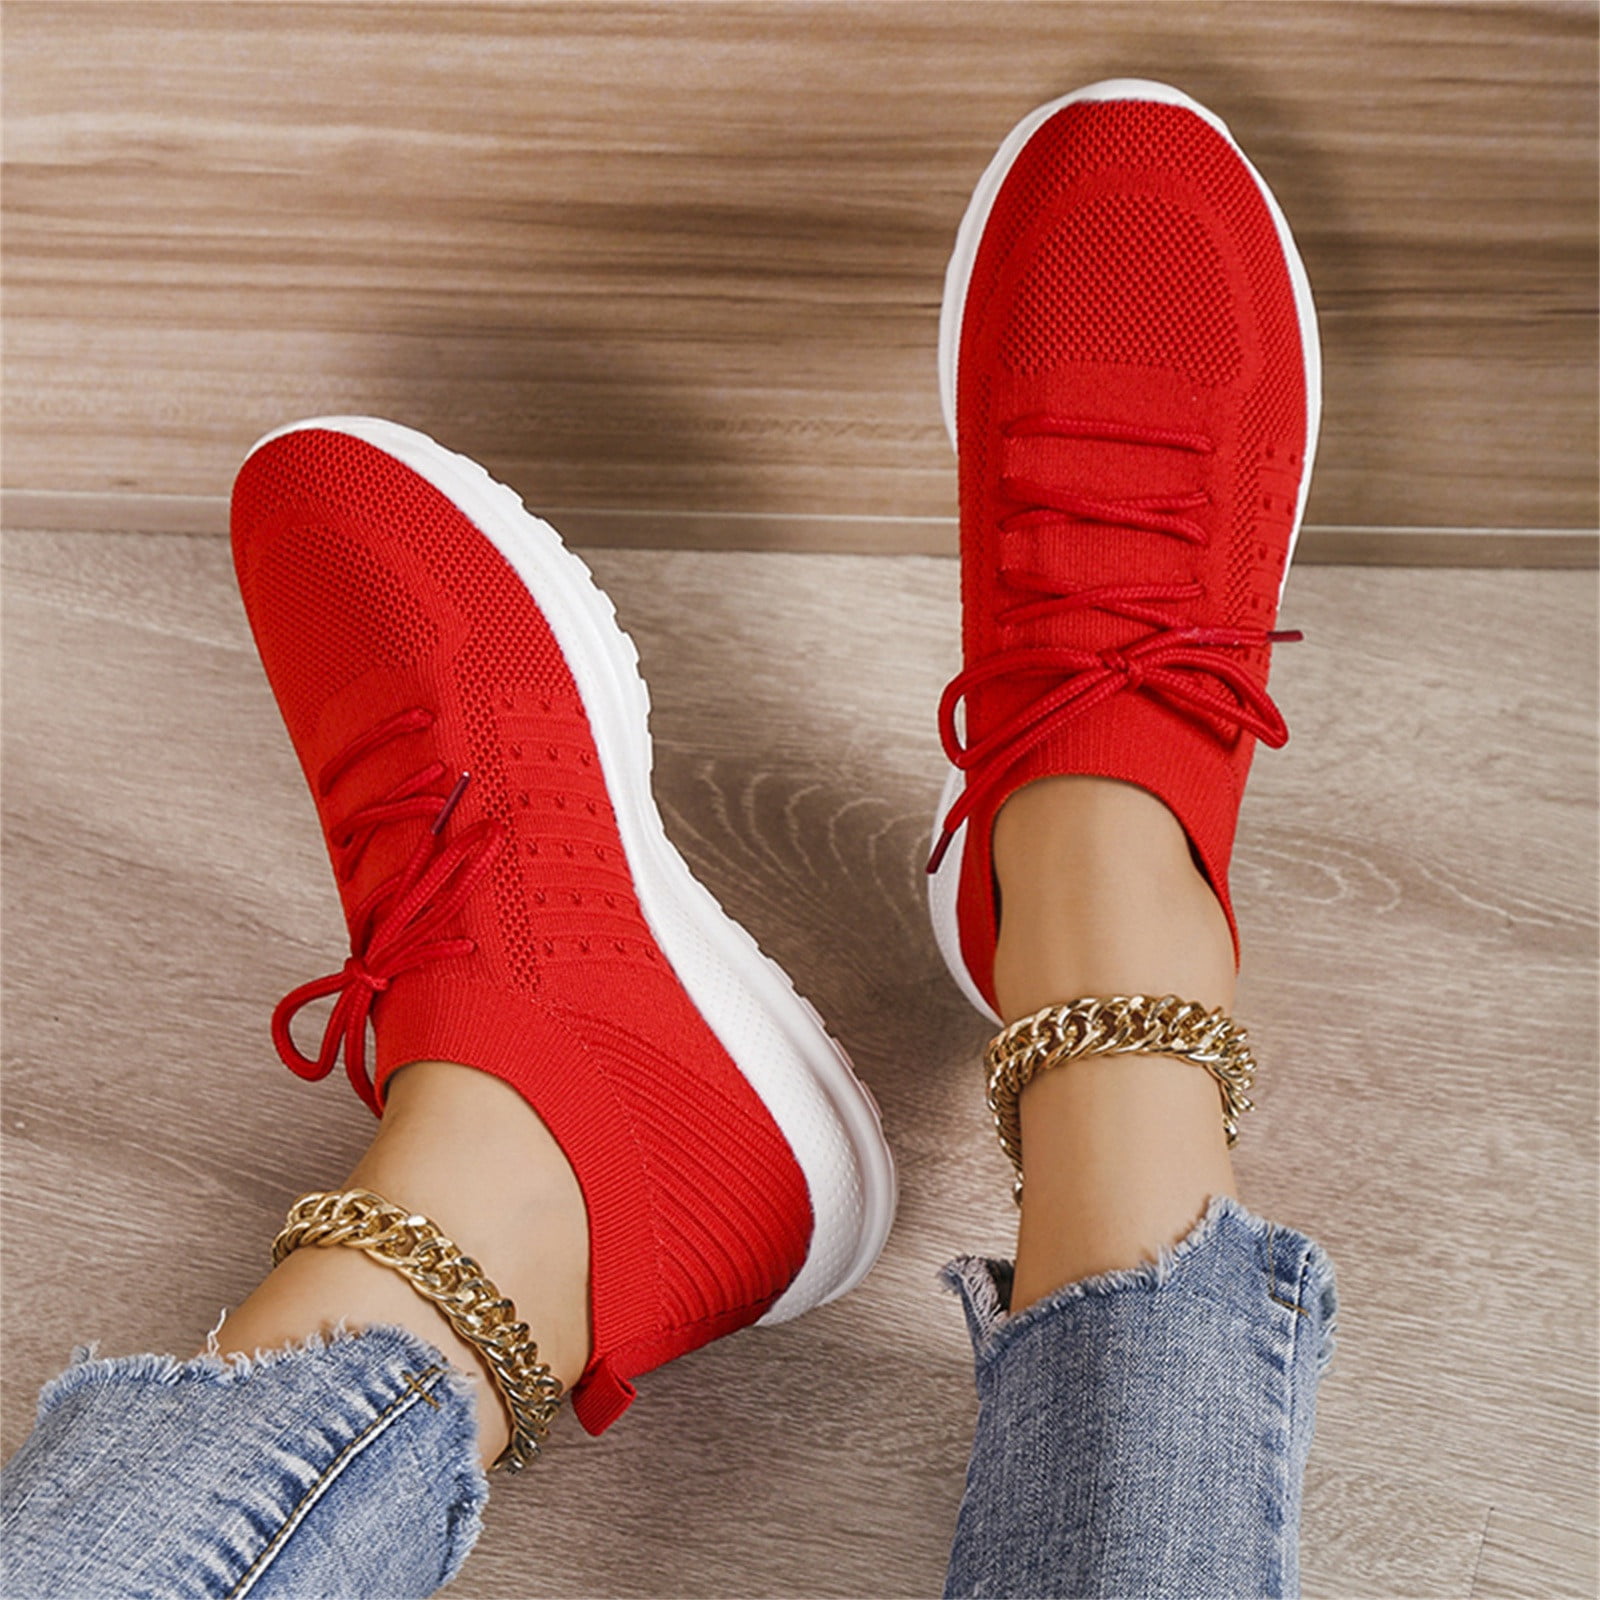 Basic Wine classic women's sneakers red - KeeShoes